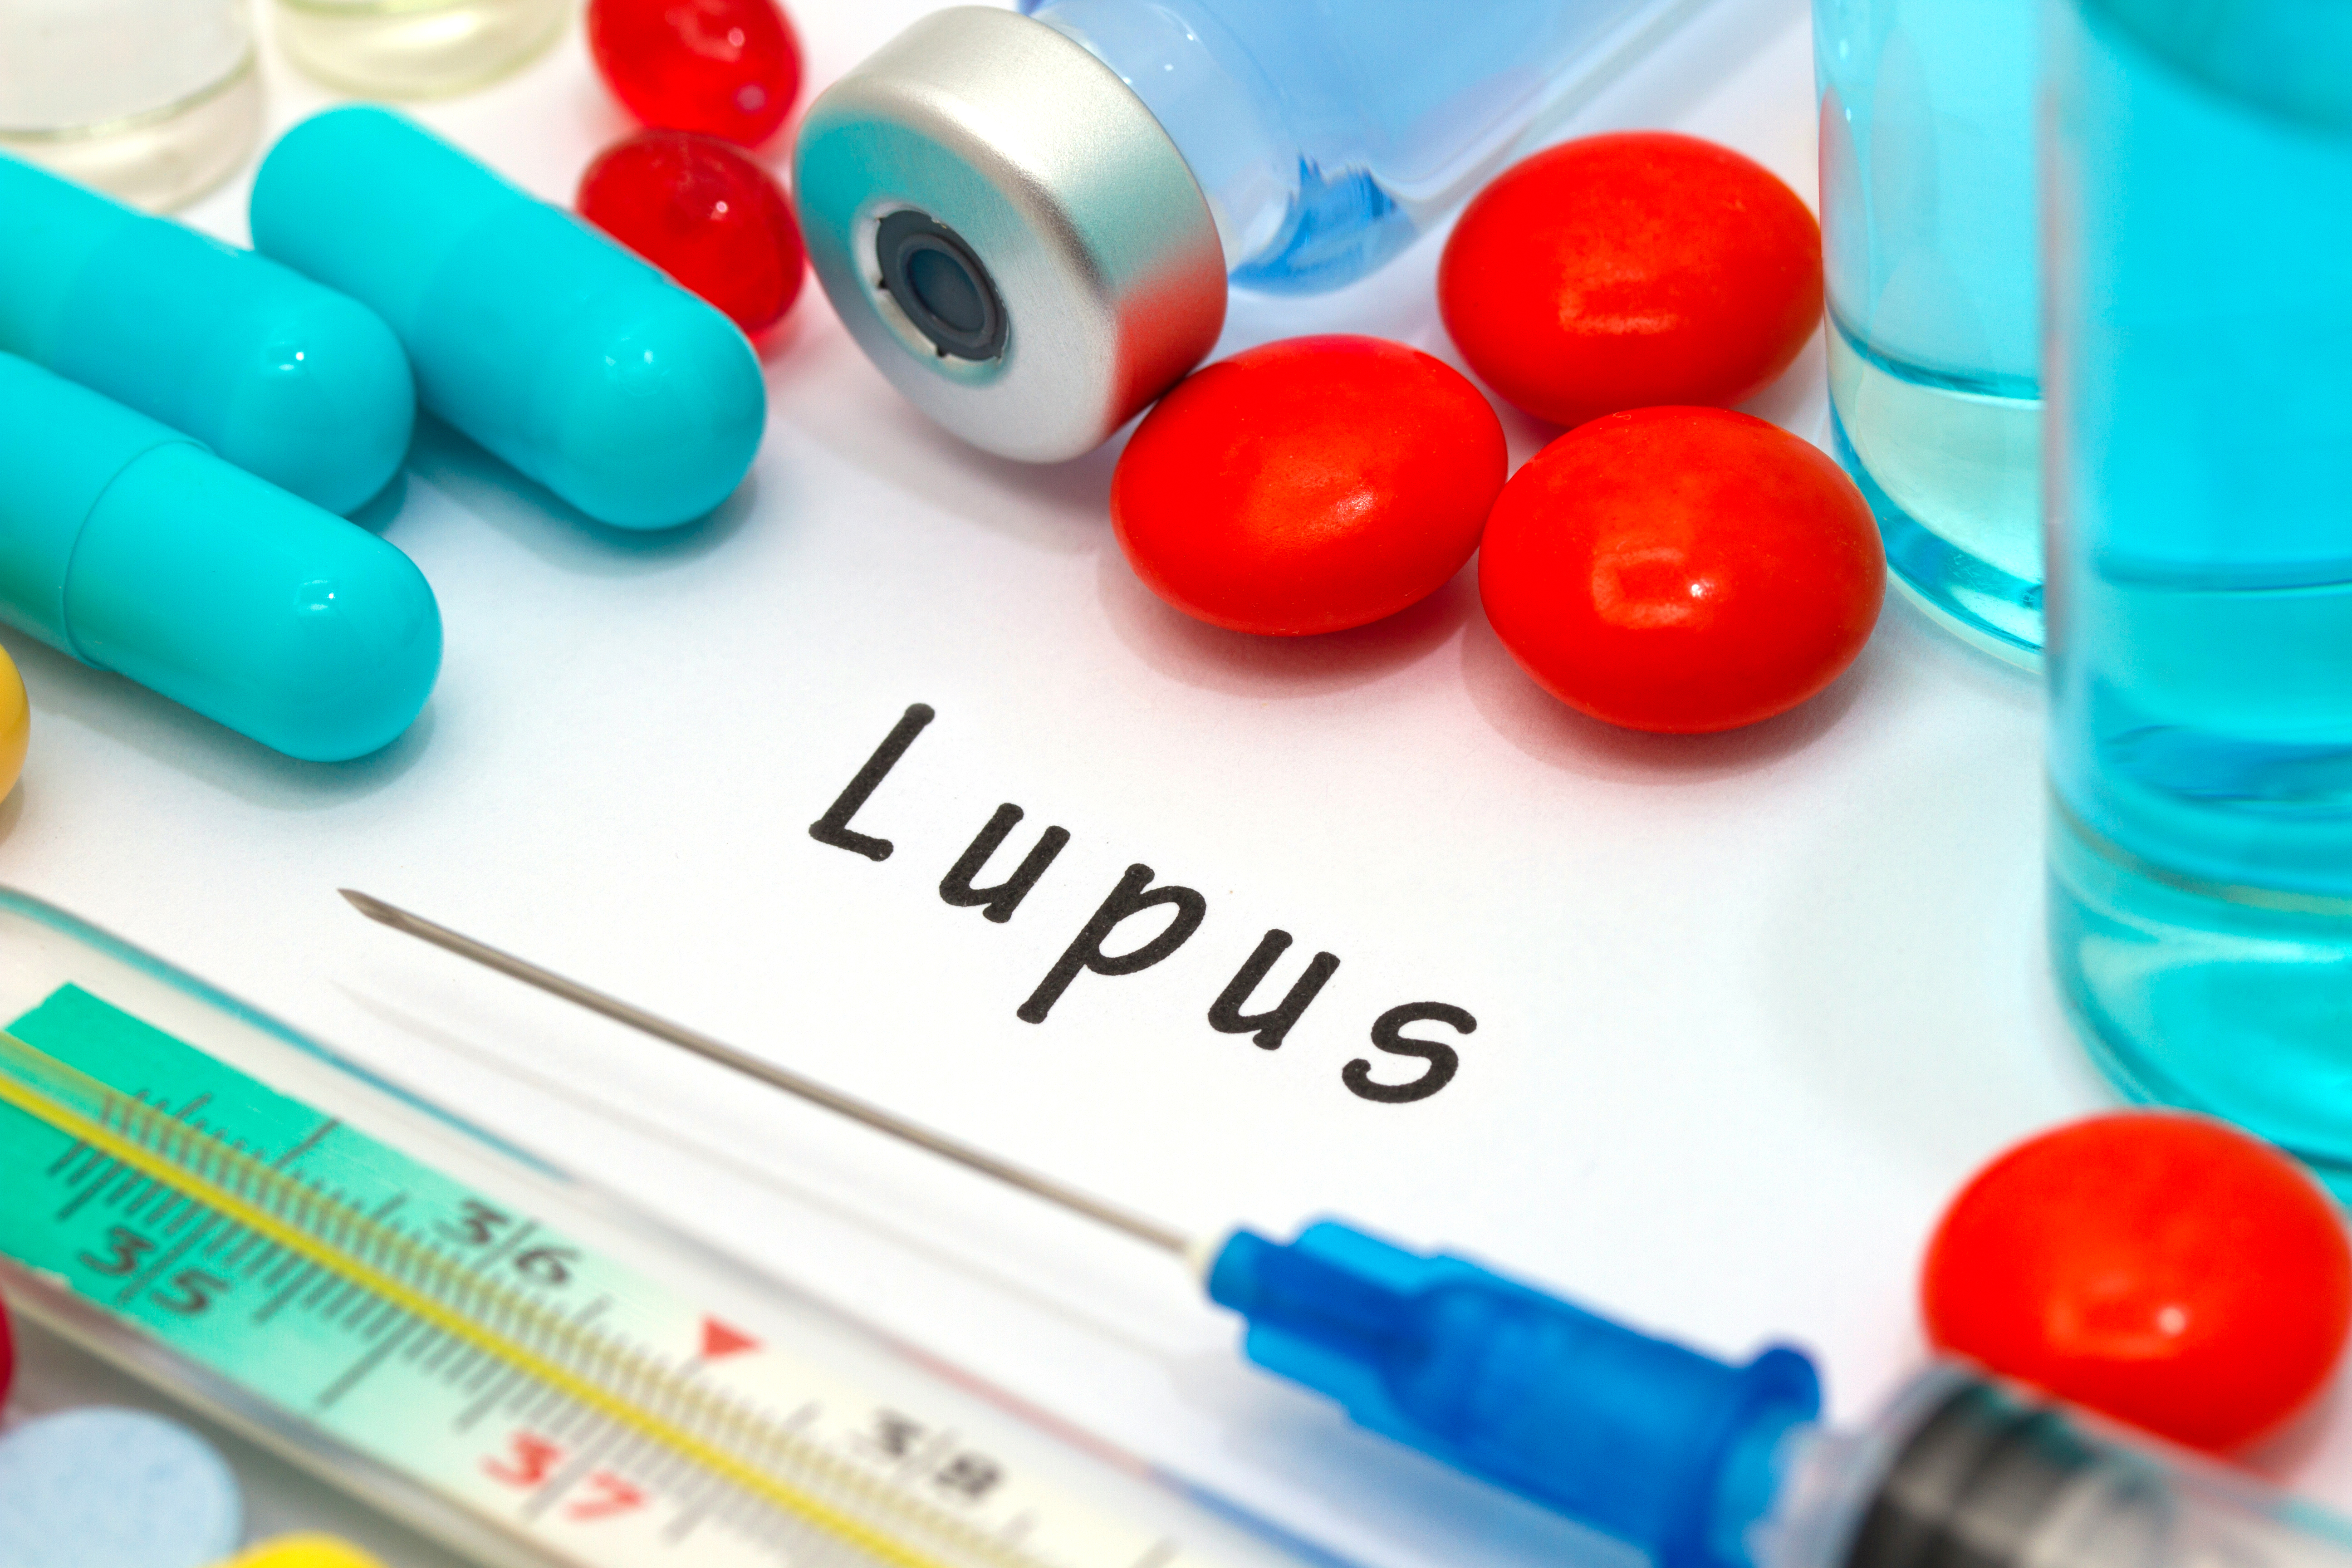 Lupus - diagnosis written on a white piece of paper